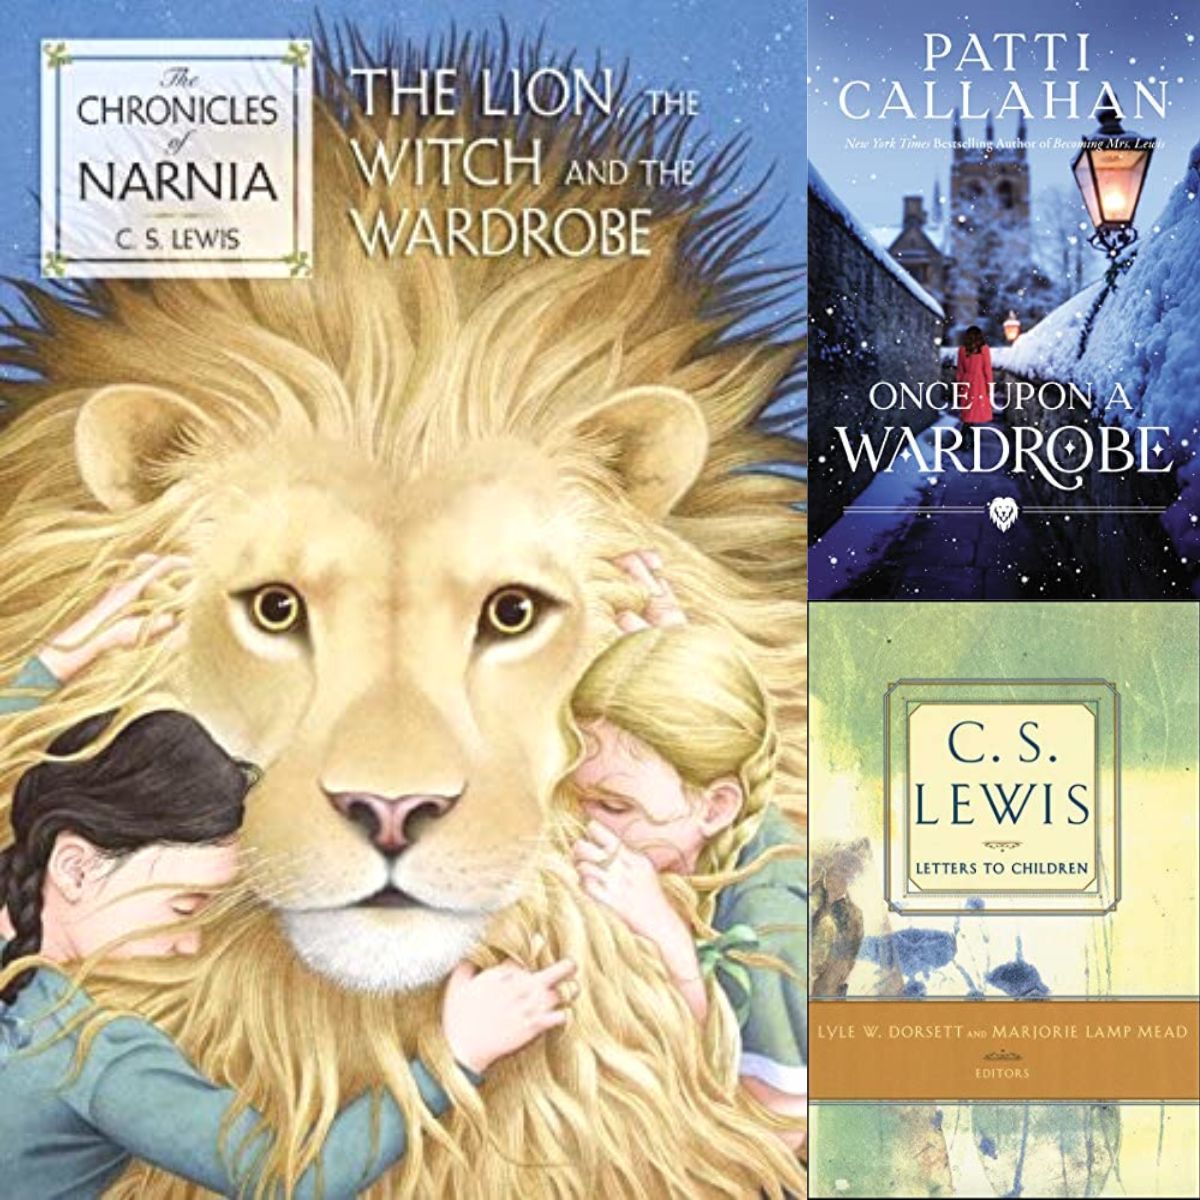 The Lion, the Witch, and the Wardrobe book cover in a collage next to two more books about C.S. Lewis.